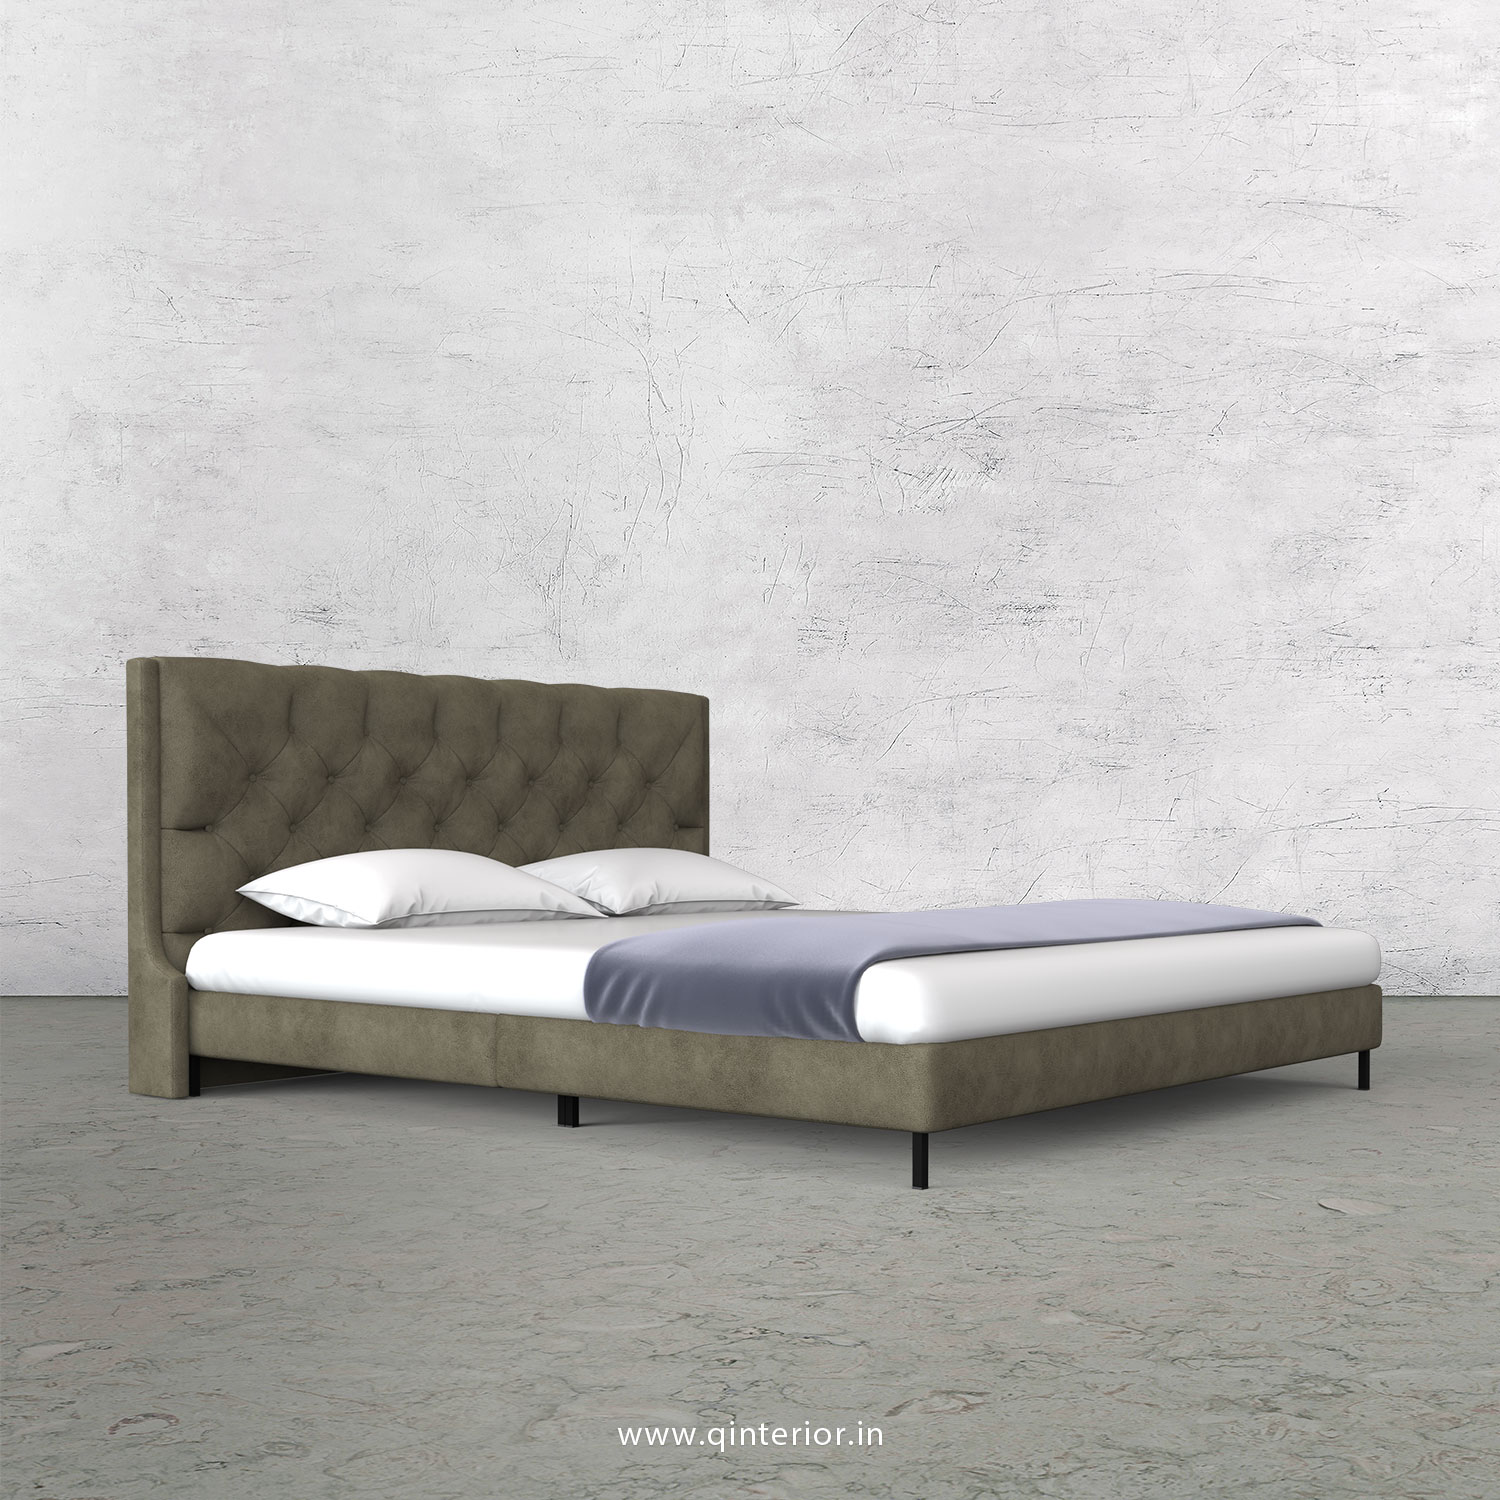 Scorpius Queen Size Bed with Fab Leather Fabric - QBD003 FL03